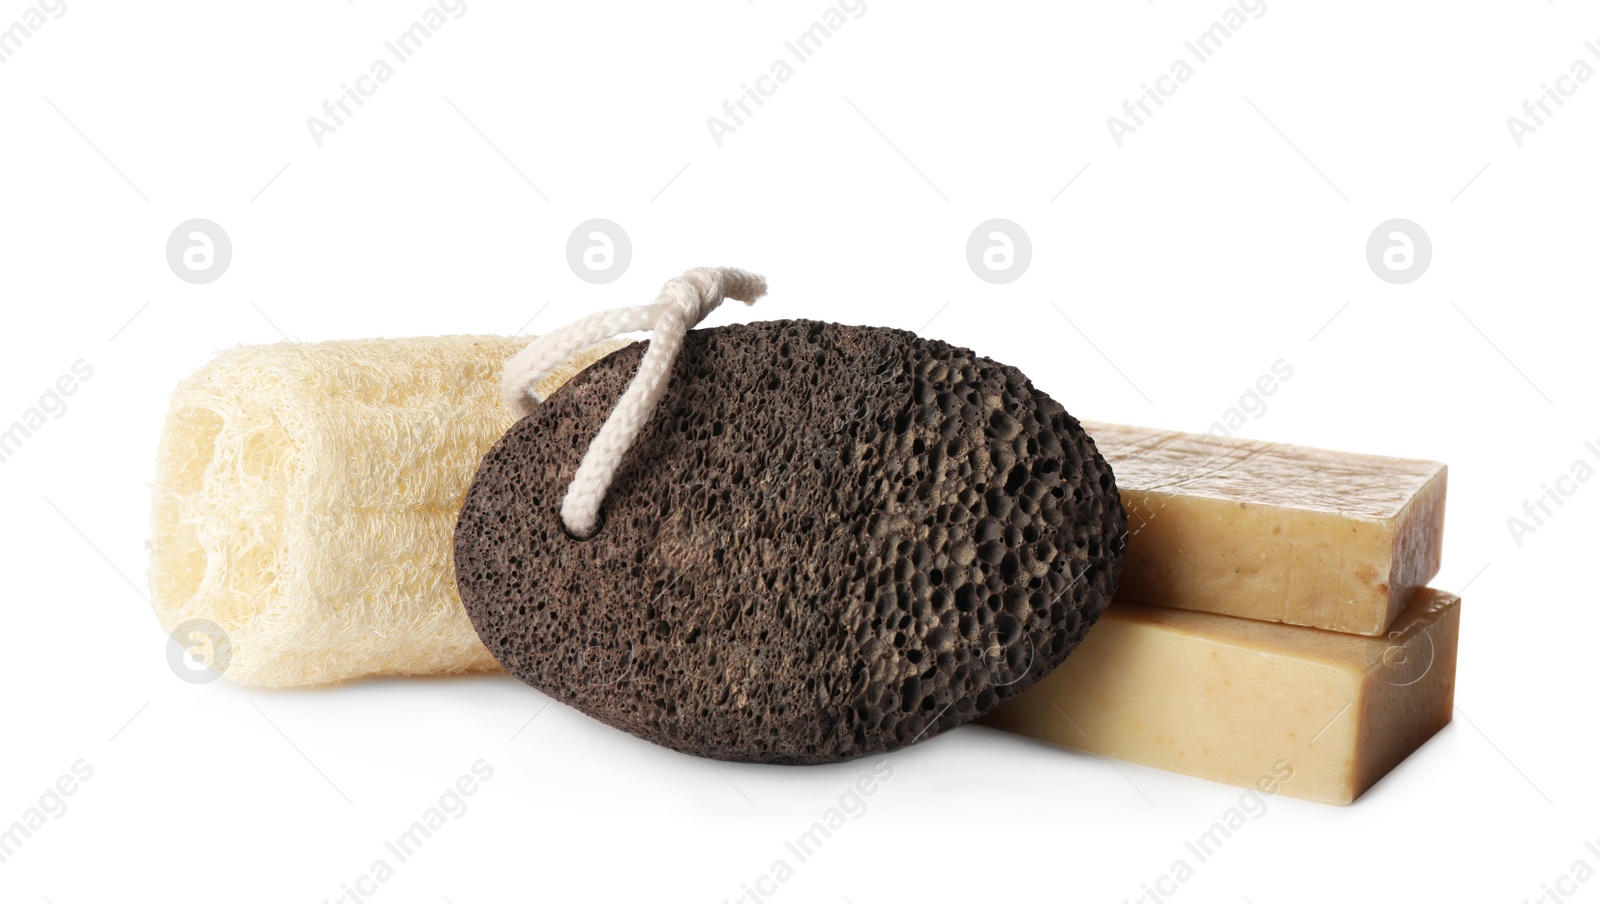 Photo of Pumice stone, soap bars and loofah on white background